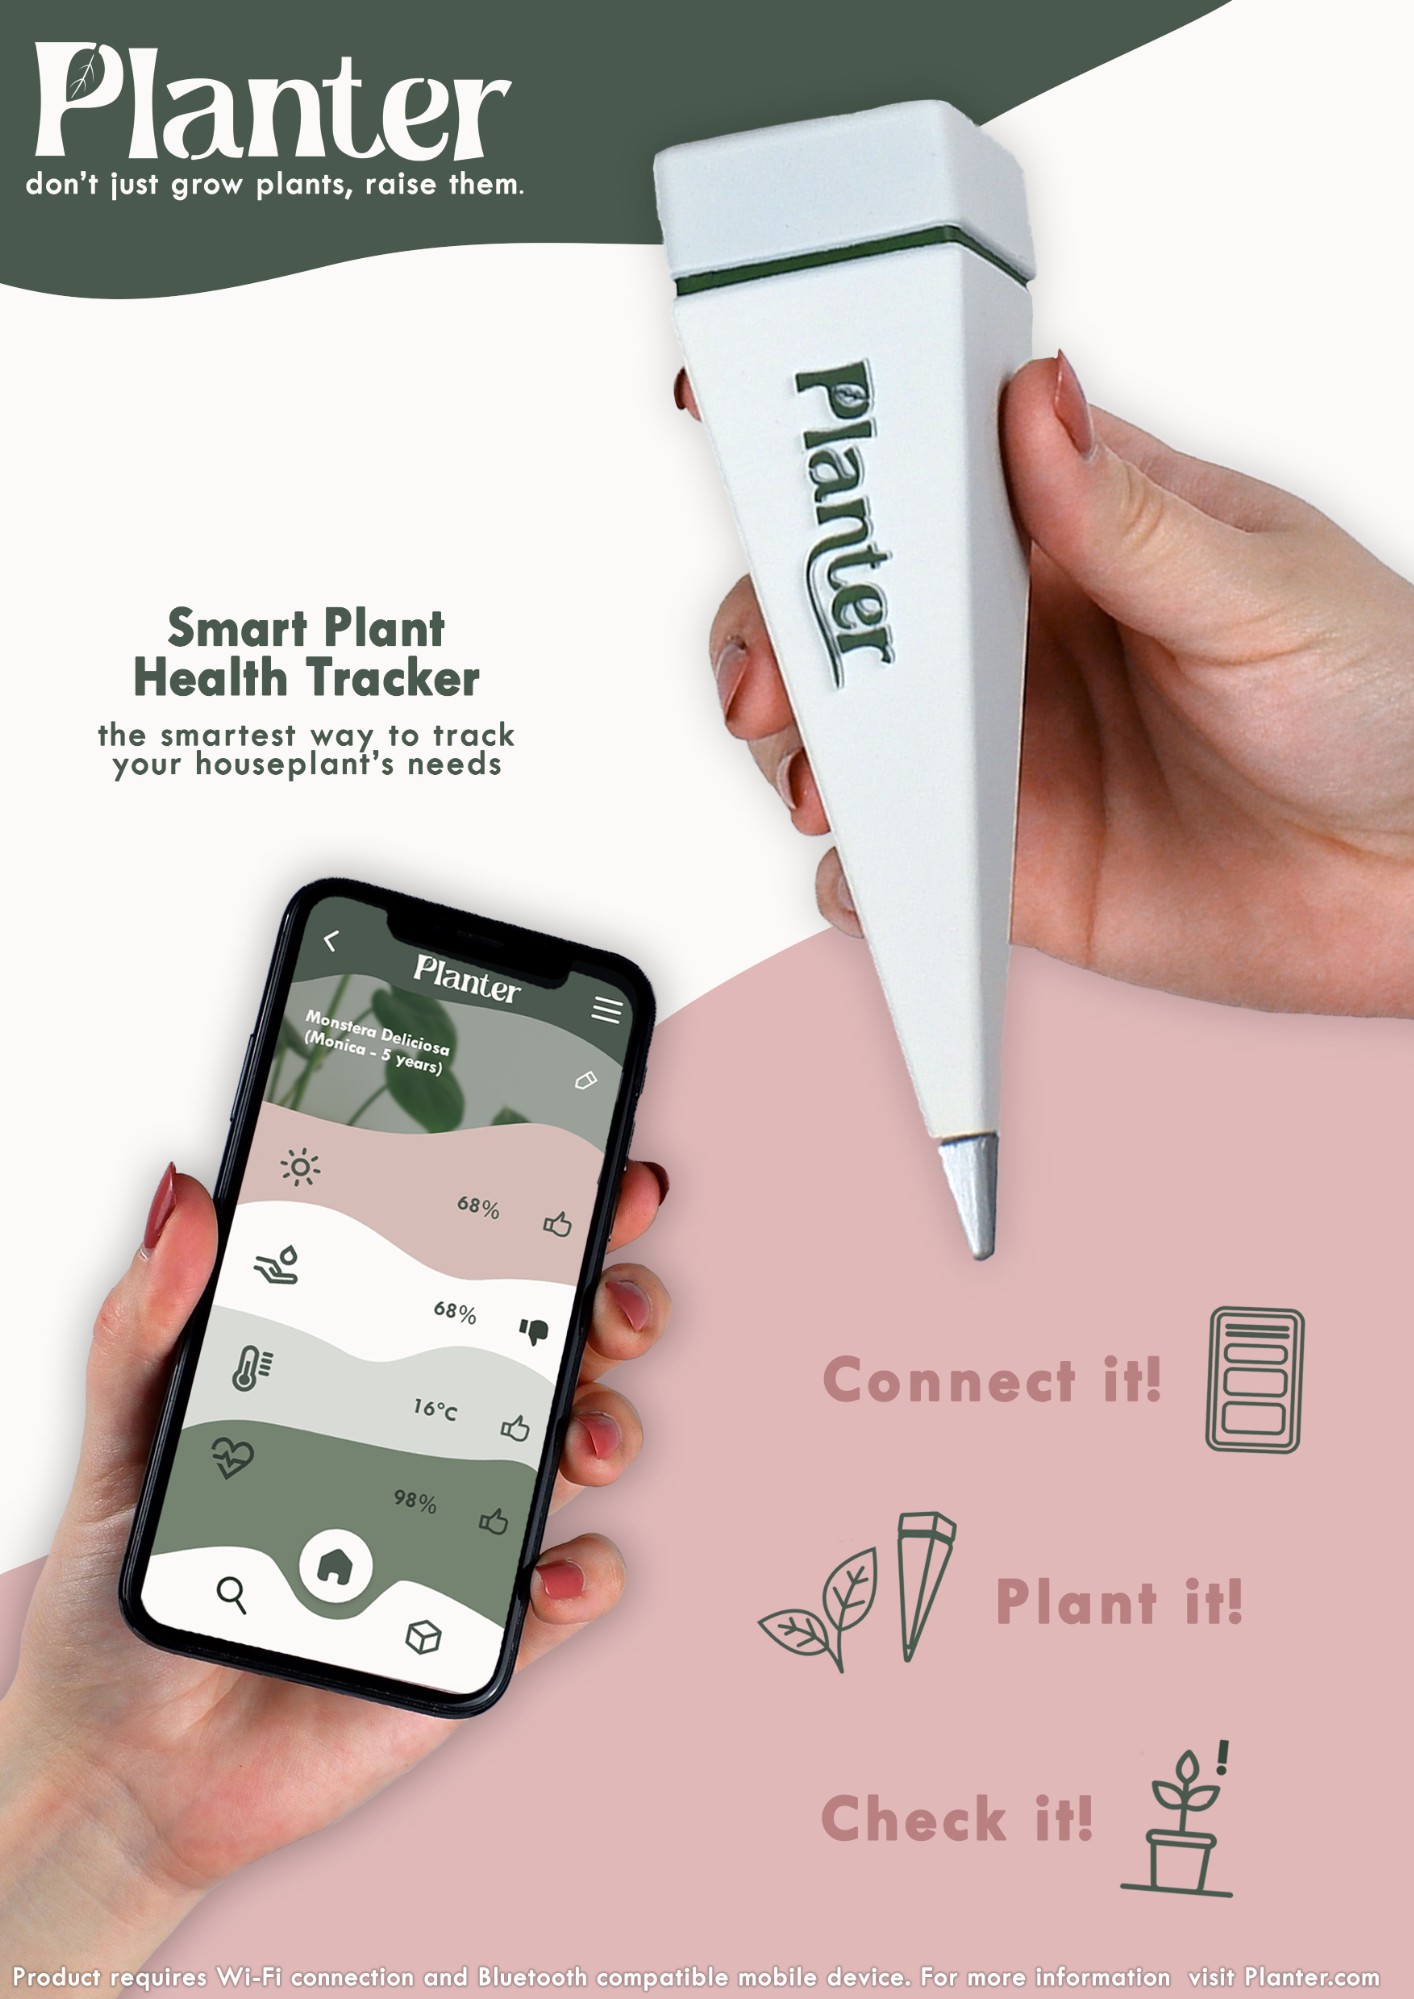 Promotional poster for hypothetical houseplant company Planter, featuring the prototype and accompanying app.